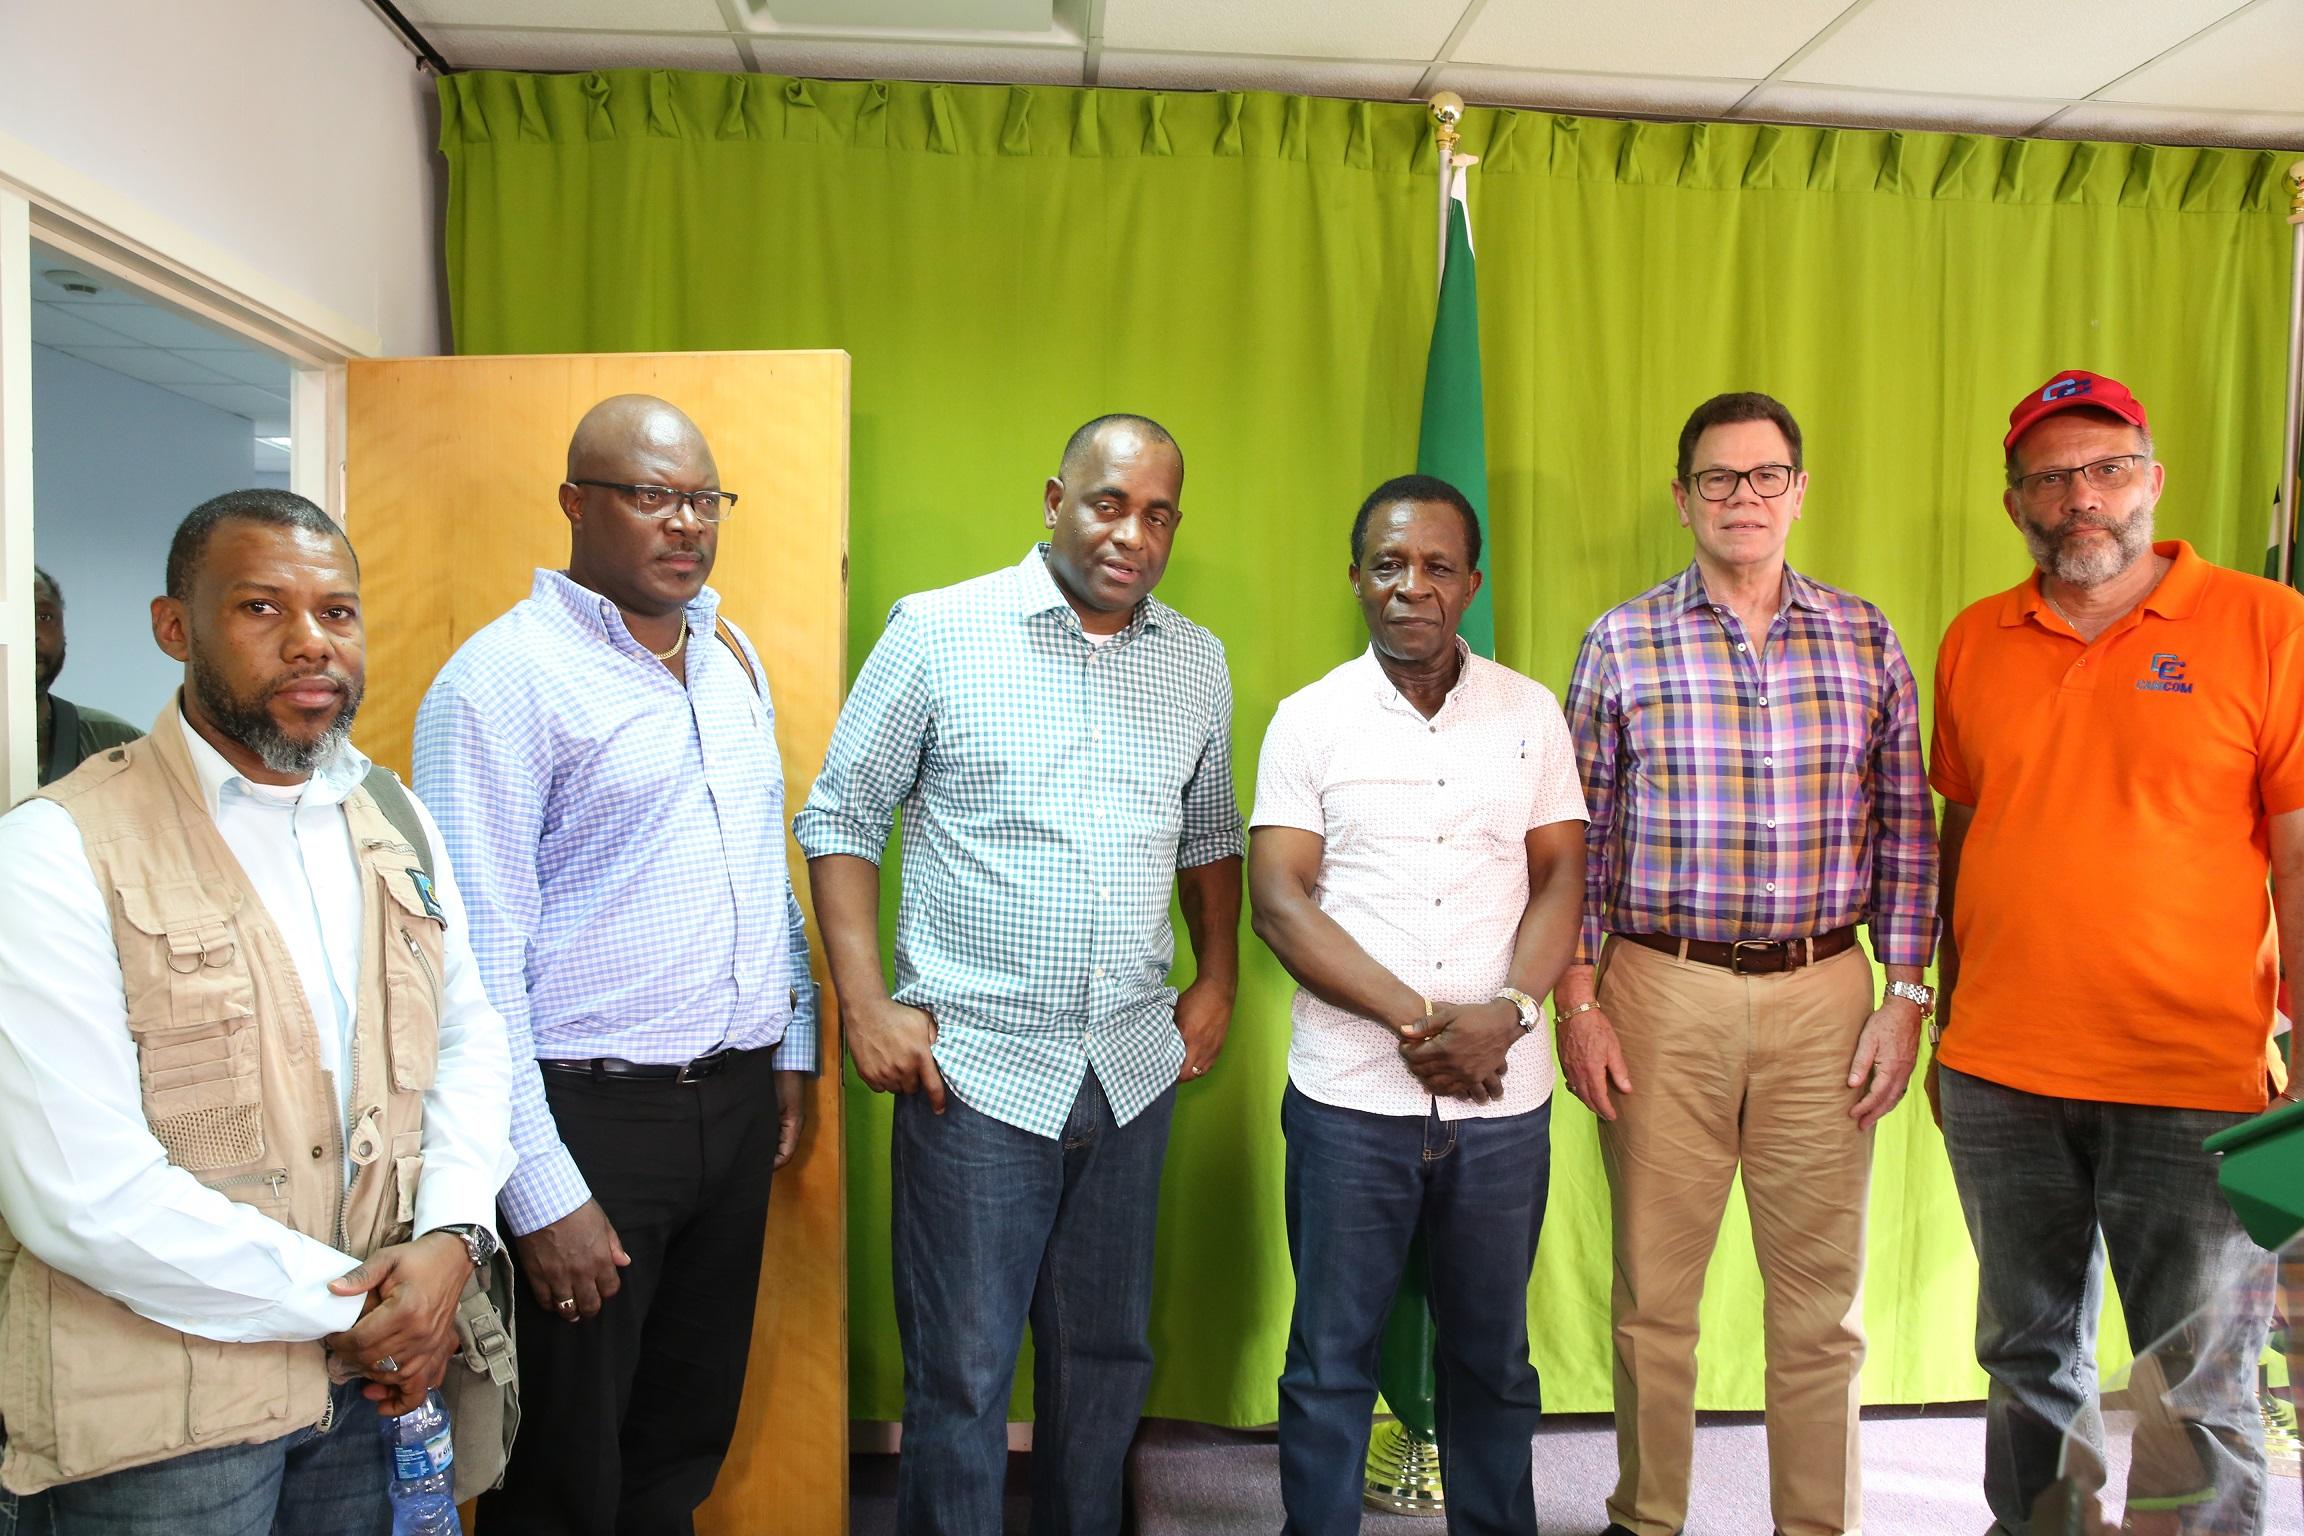 Smith was part of a delegation that met with the Prime Minister of Dominica, Hon. Roosevelt Skerrit in Roseau to discuss rehabilitation and recovery efforts for the country following Hurricane Maria